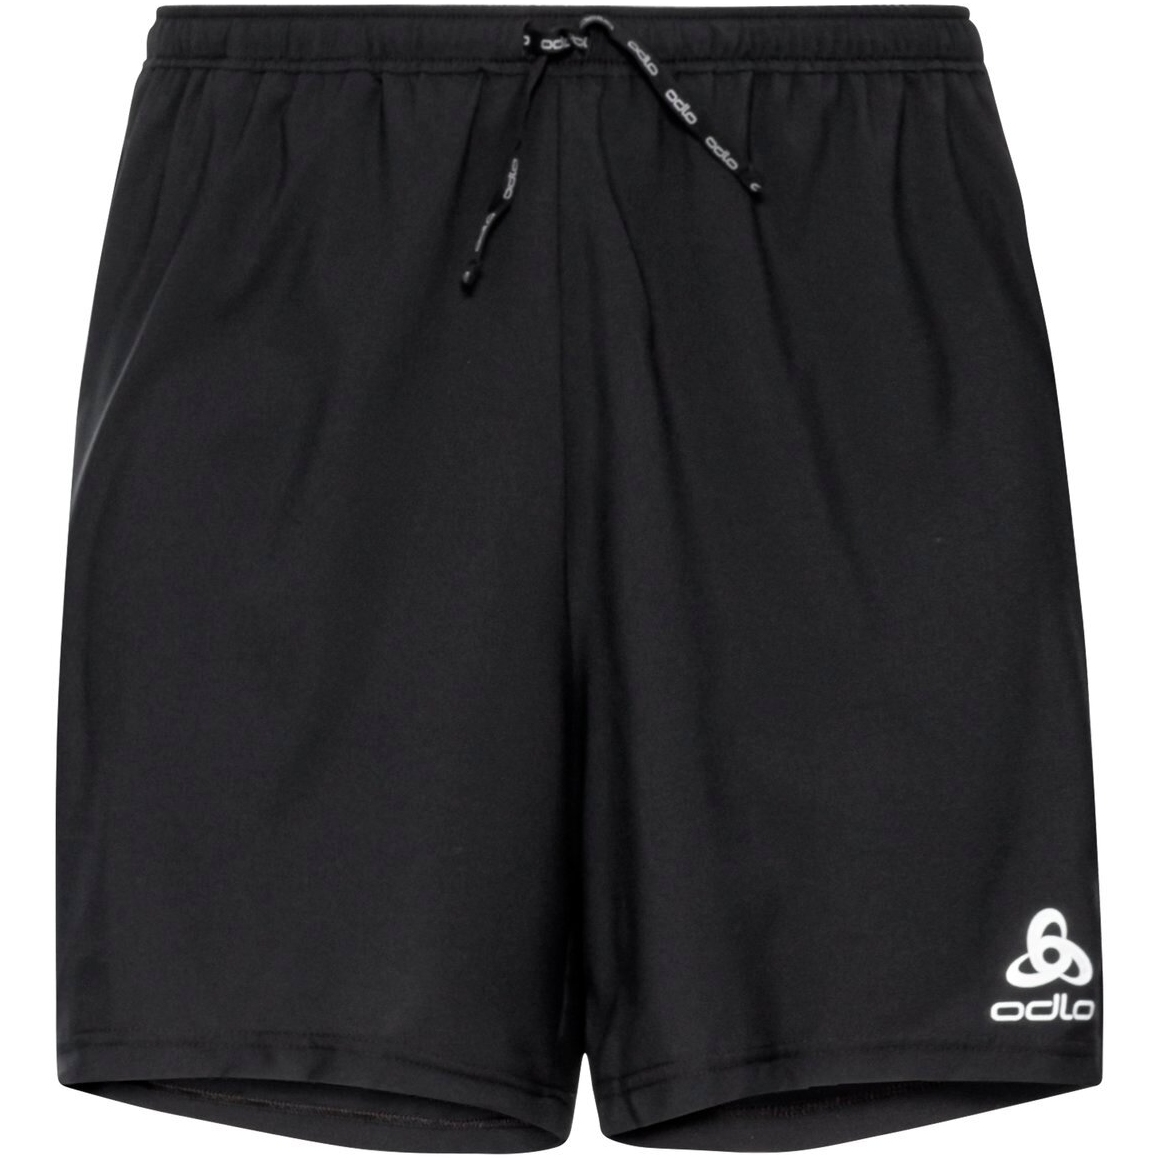 Picture of Odlo Essential 6 Inch Running Shorts Men - black